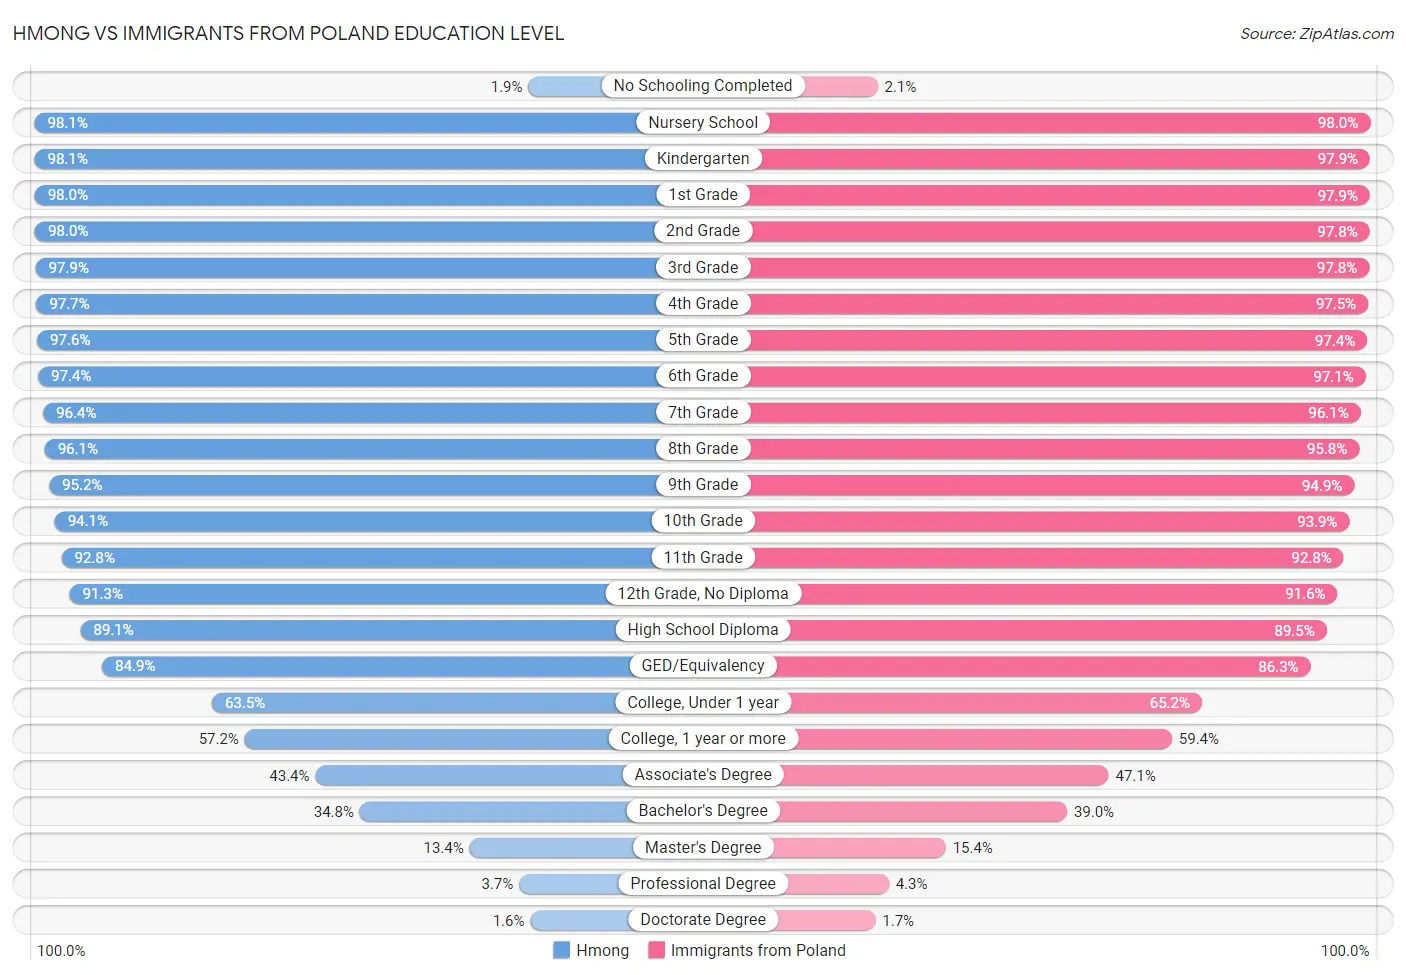 Hmong vs Immigrants from Poland Education Level